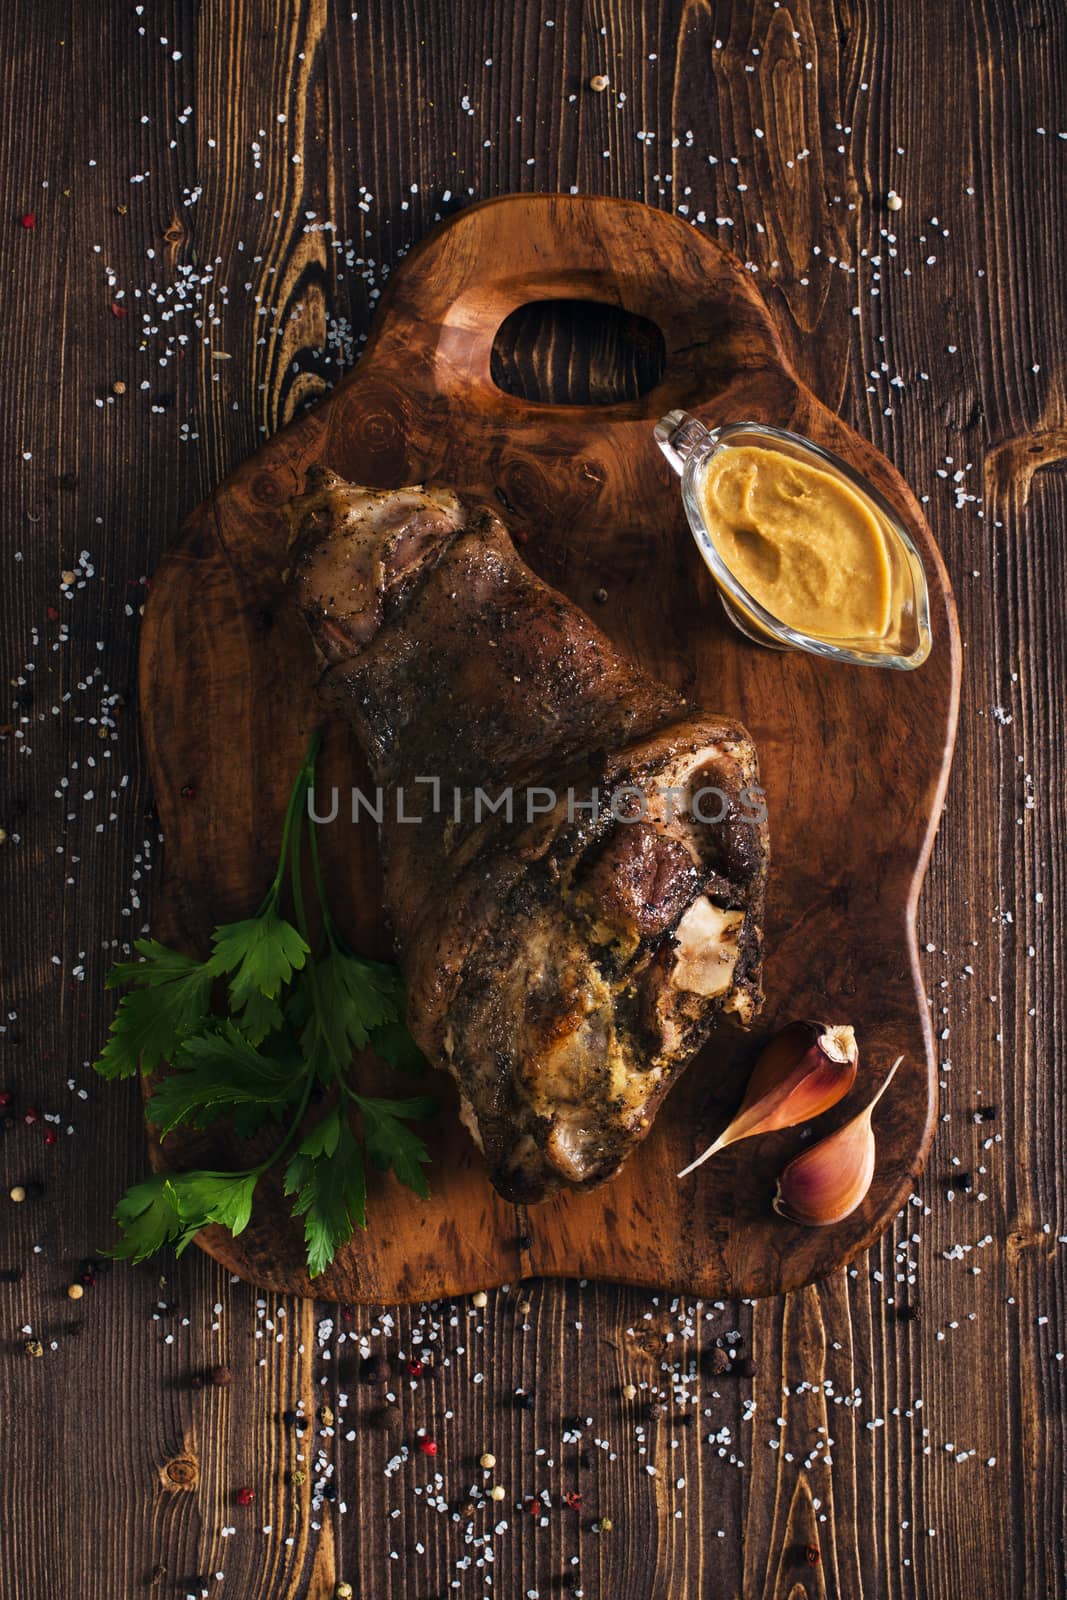 Whole roasted pork knuckle with mustard, wooden background